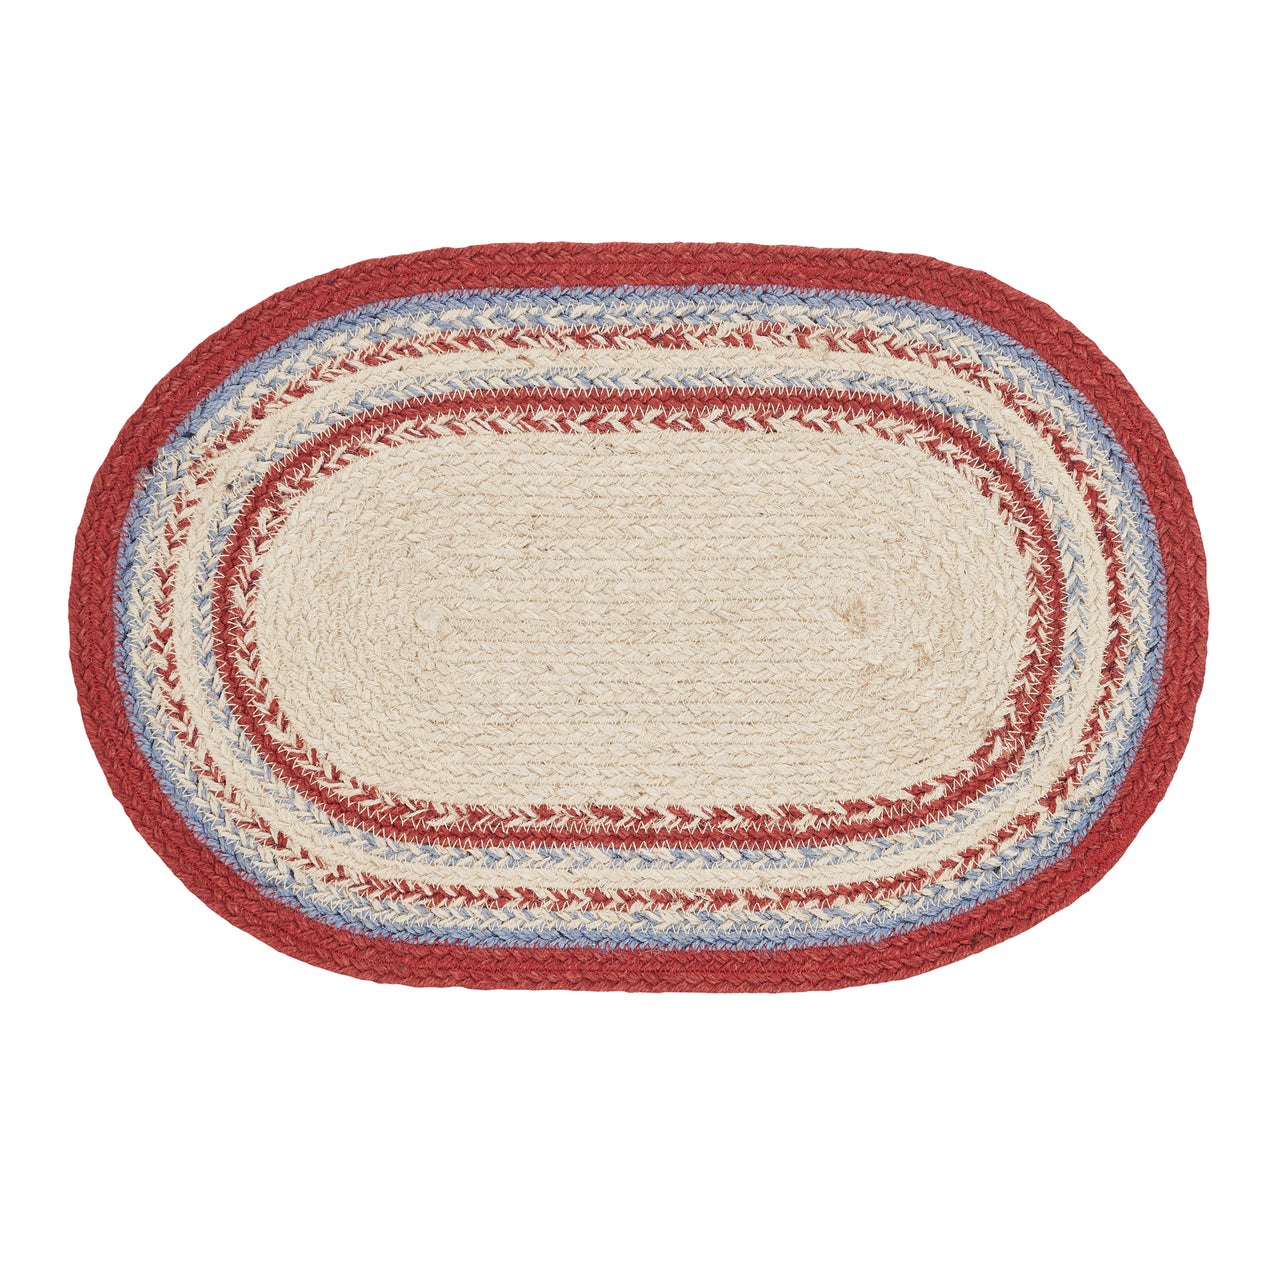 Celebration Jute Braided Oval Placemat 12x18 VHC Brands